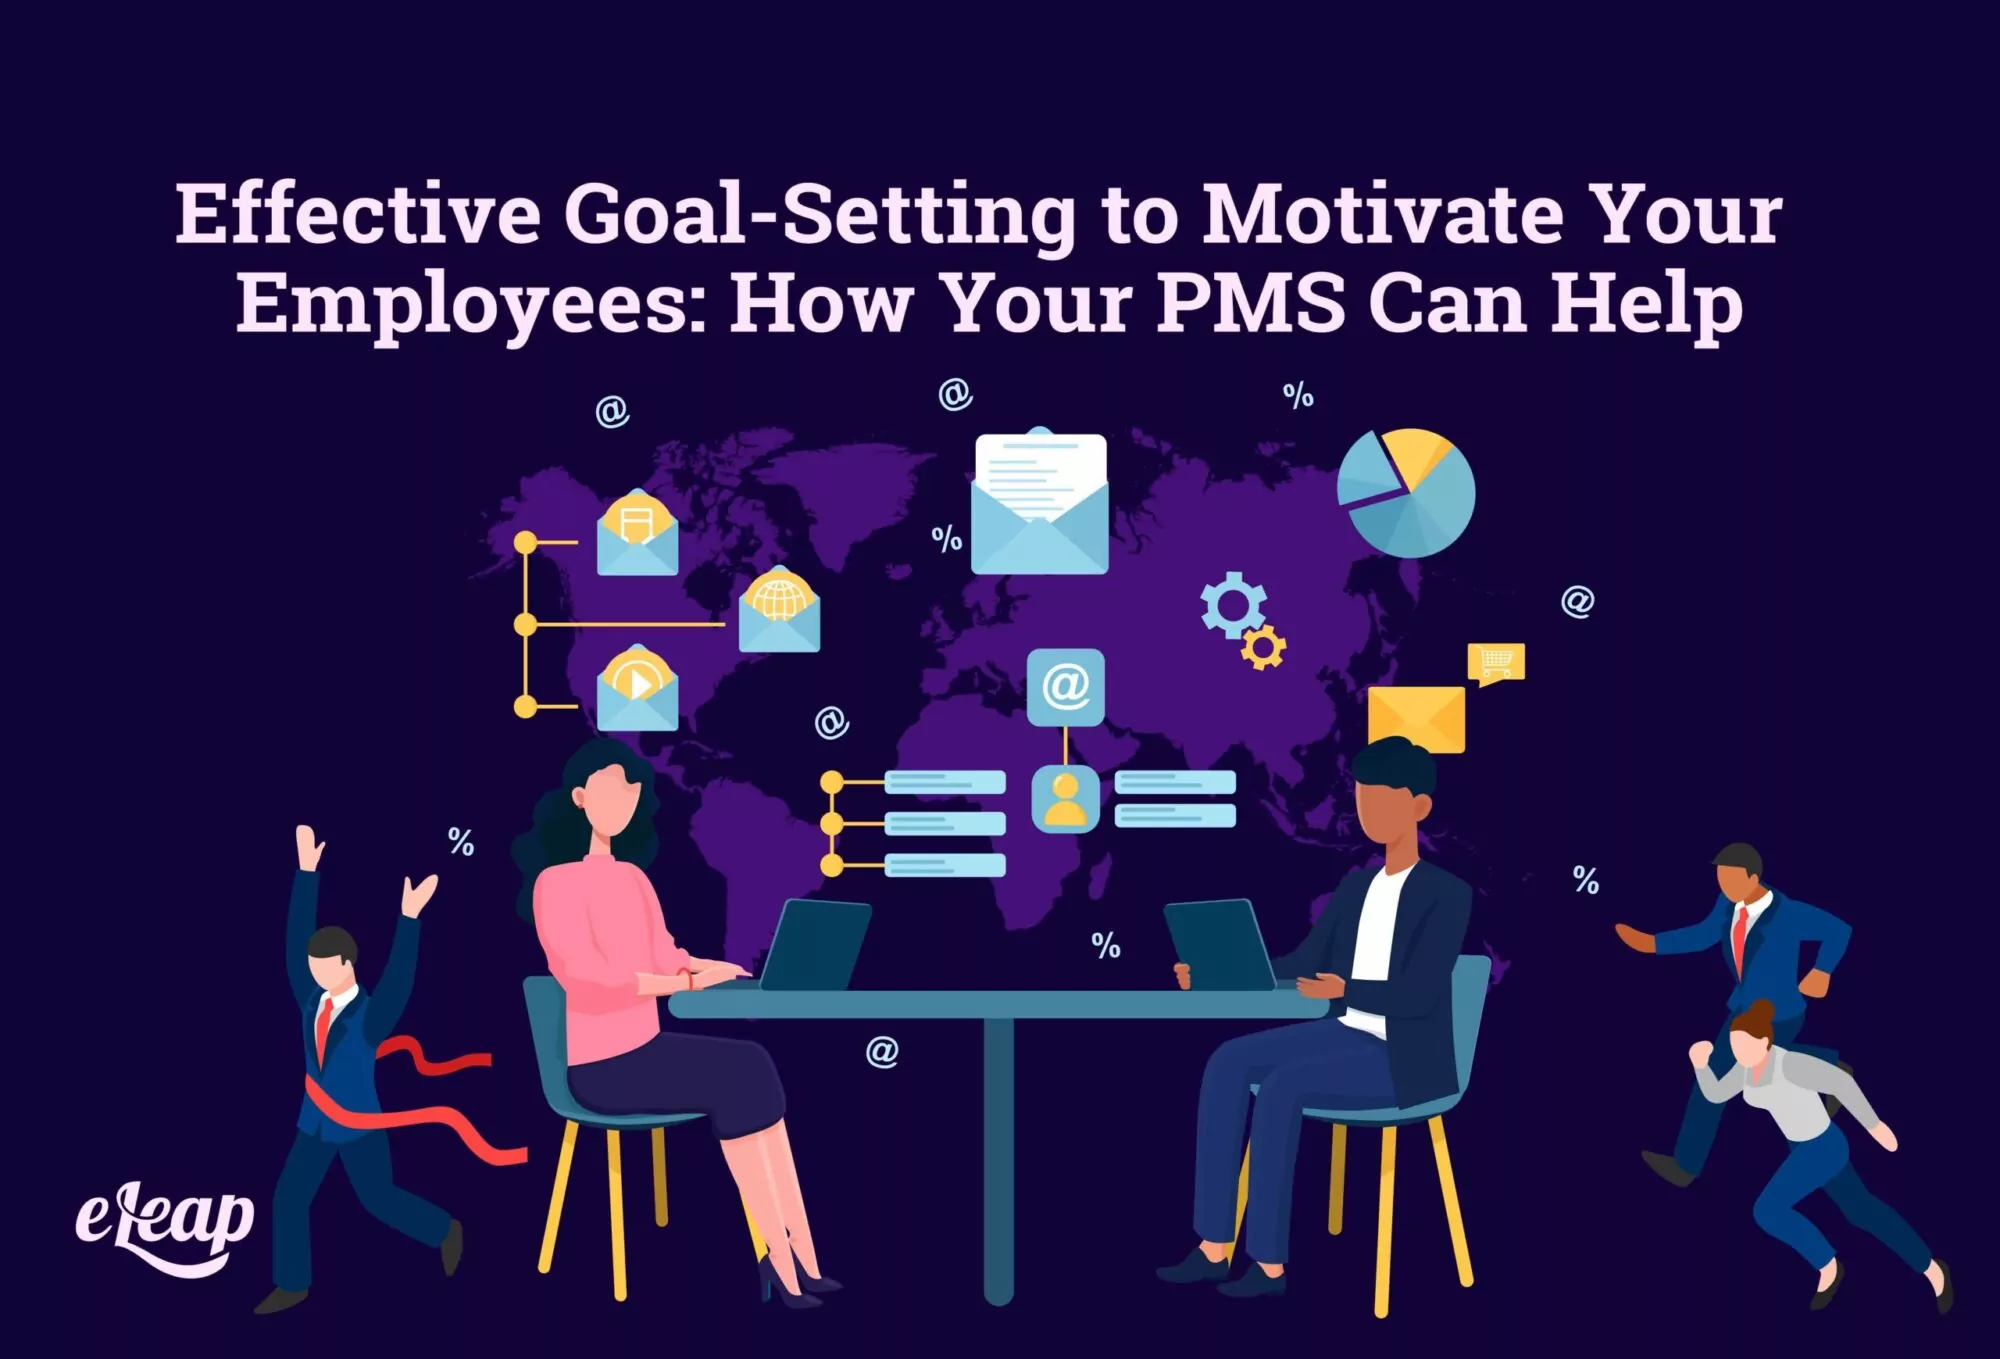 Effective Goal-Setting to Motivate Your Employees: How Your PMS Can Help